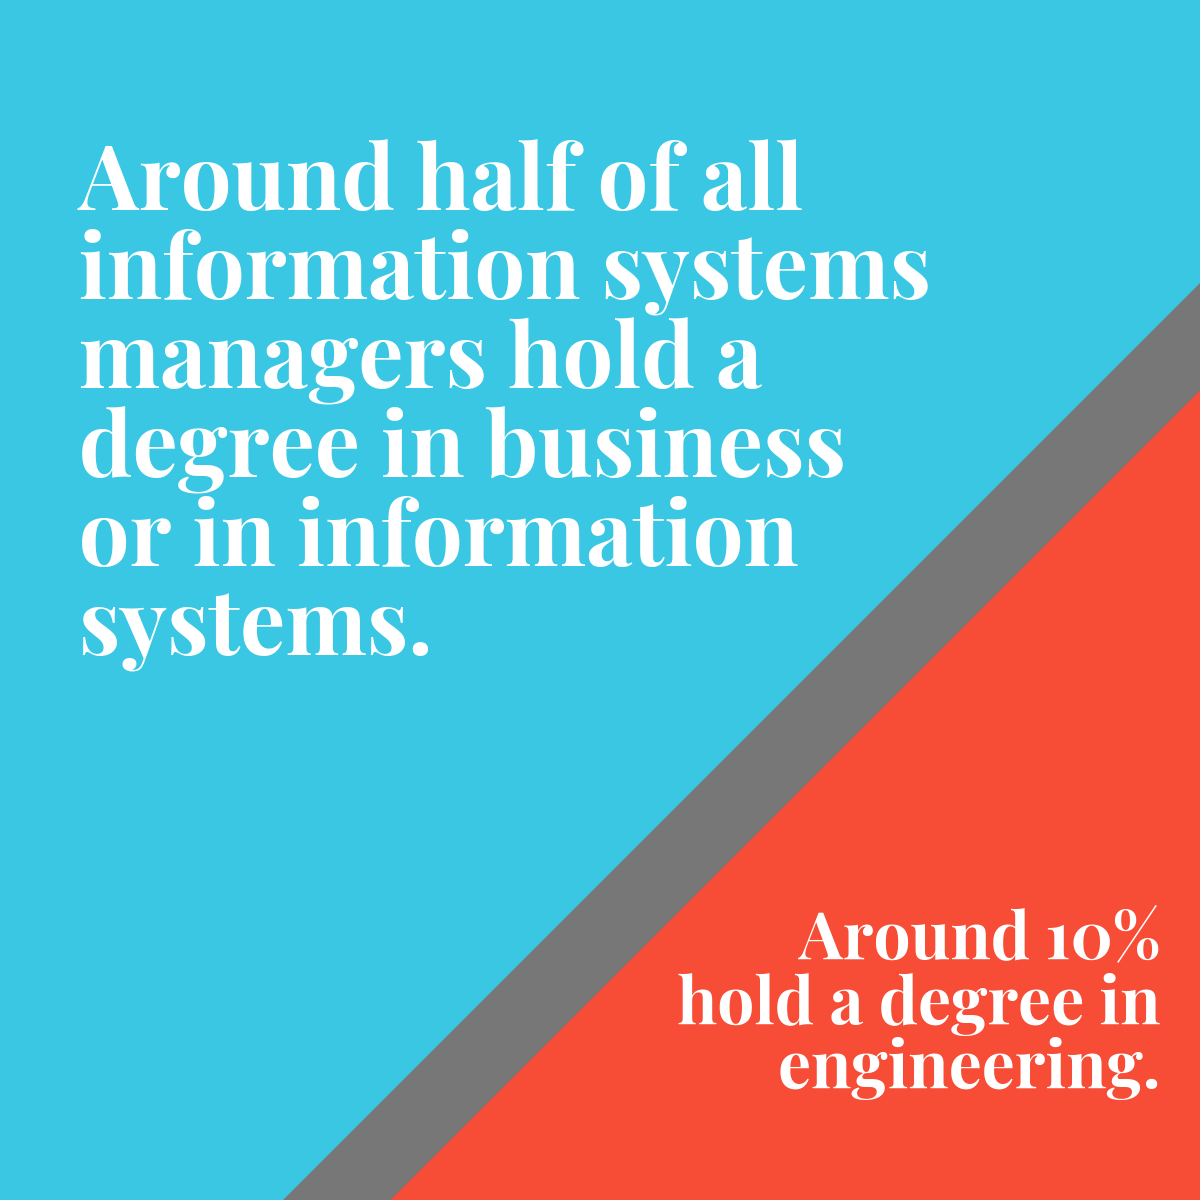 Around half of all information systems managers hold a degree in business or in information systems. Around 10% hold a degree in engineering.